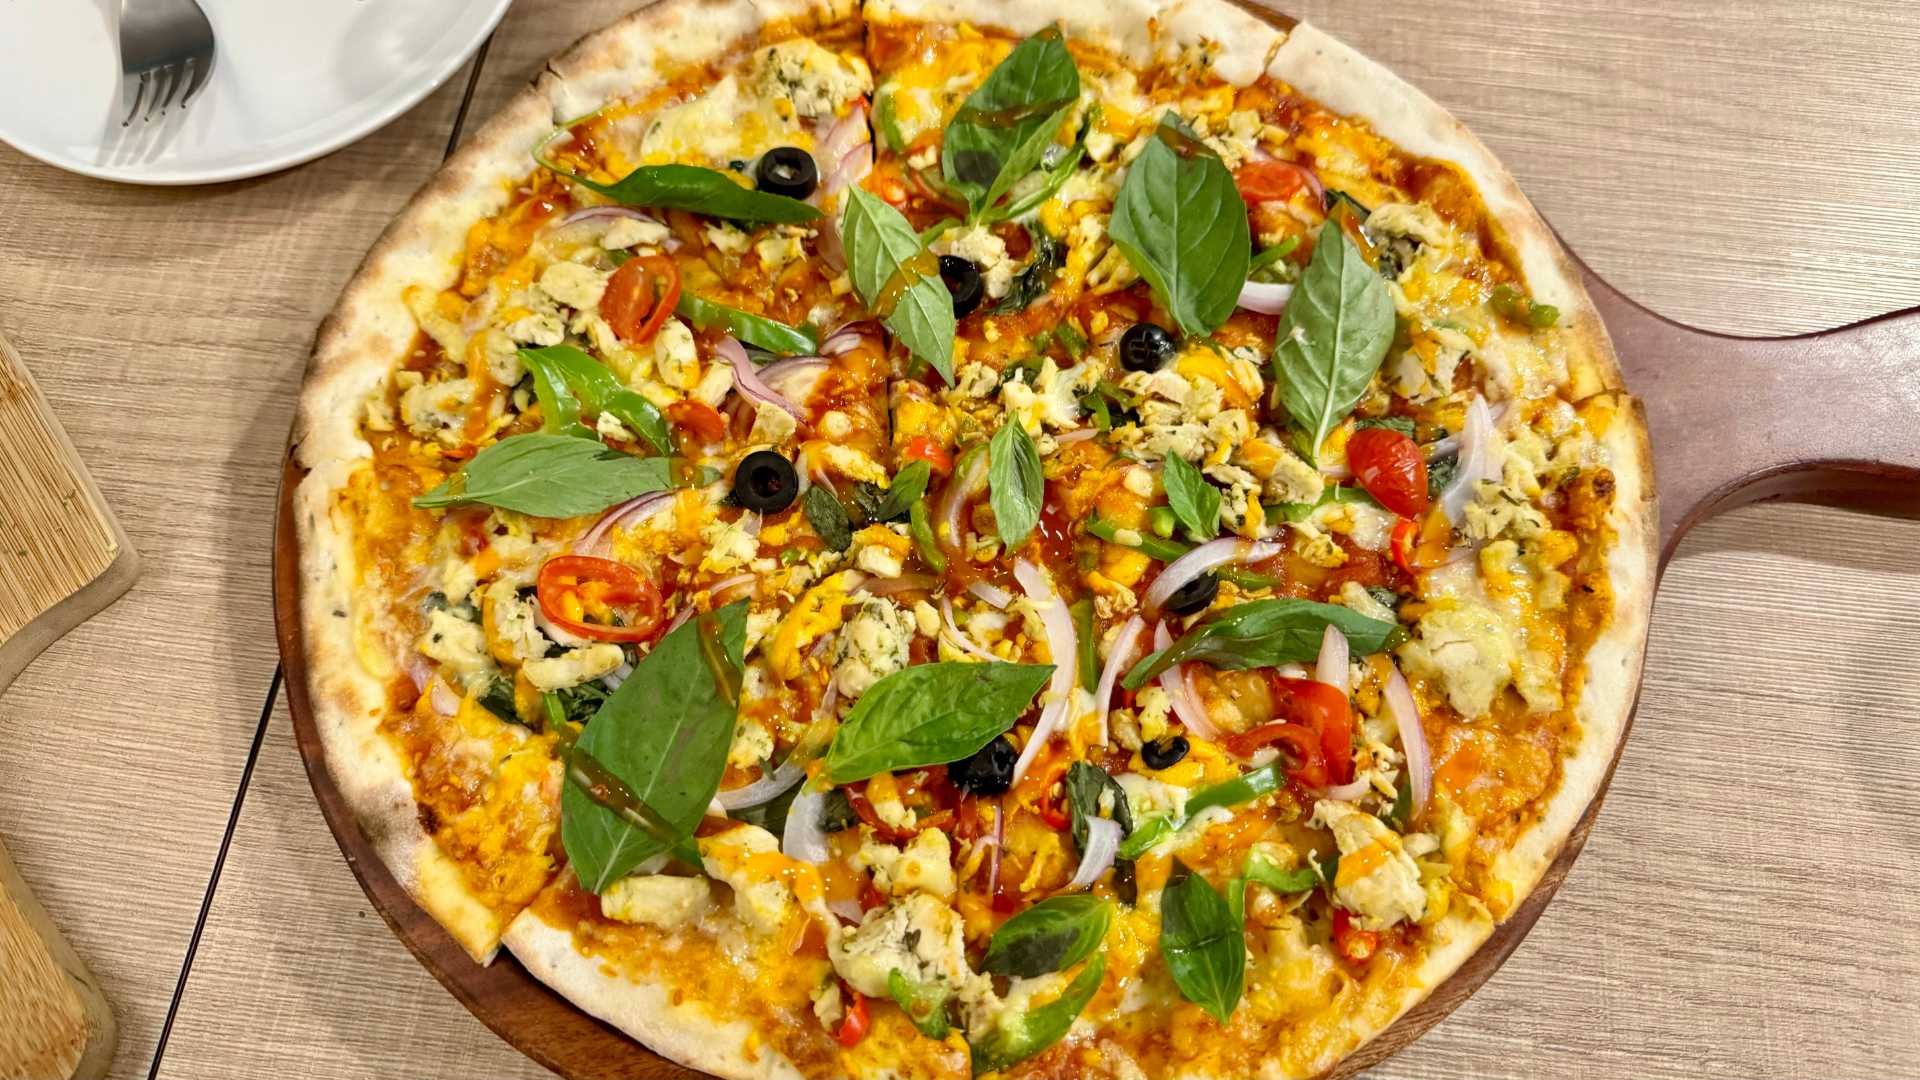 A 12-inch pizza on a thin base, rich in toppings such as basil leaves, onion, tomato, peppers, capsicum, chillies, corn, and chicken.